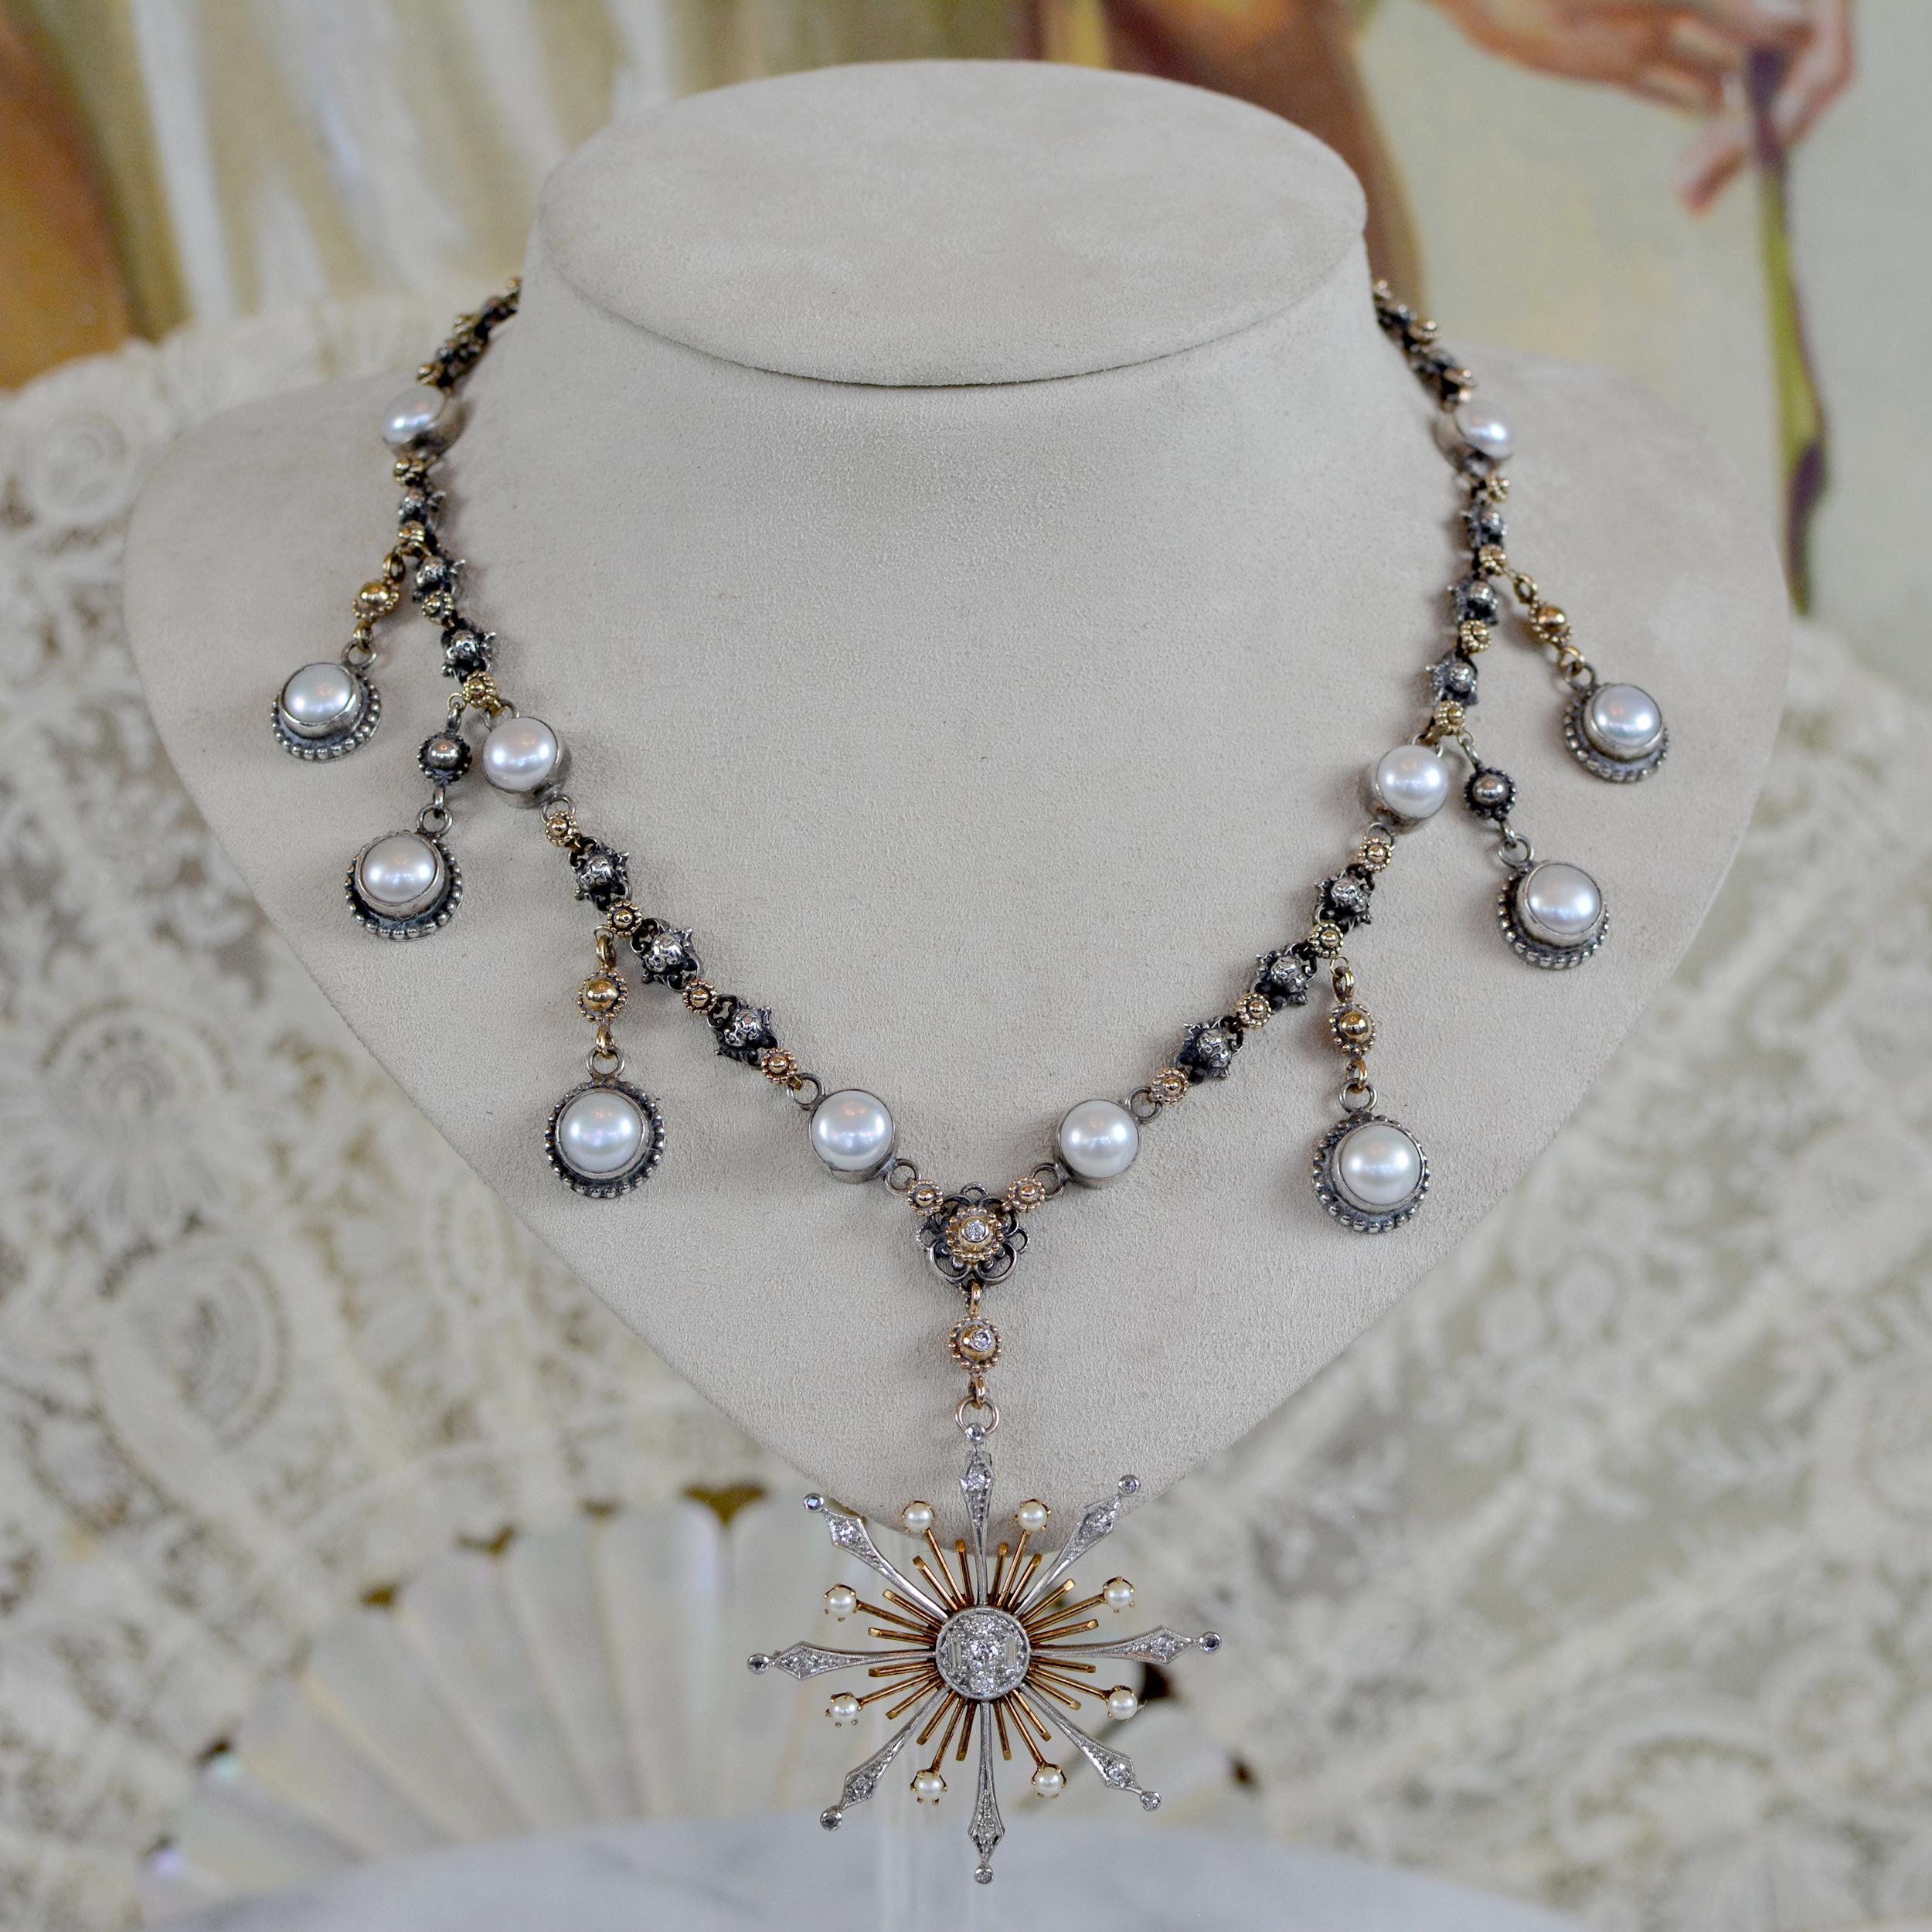 This exquisite Jill Garber drop necklace is comprised of twenty eight very fine original figural cherub angel links, joined together by finely cast 14 karat gold flower links. Eight natural freshwater pearls are bezel set in sterling silver and